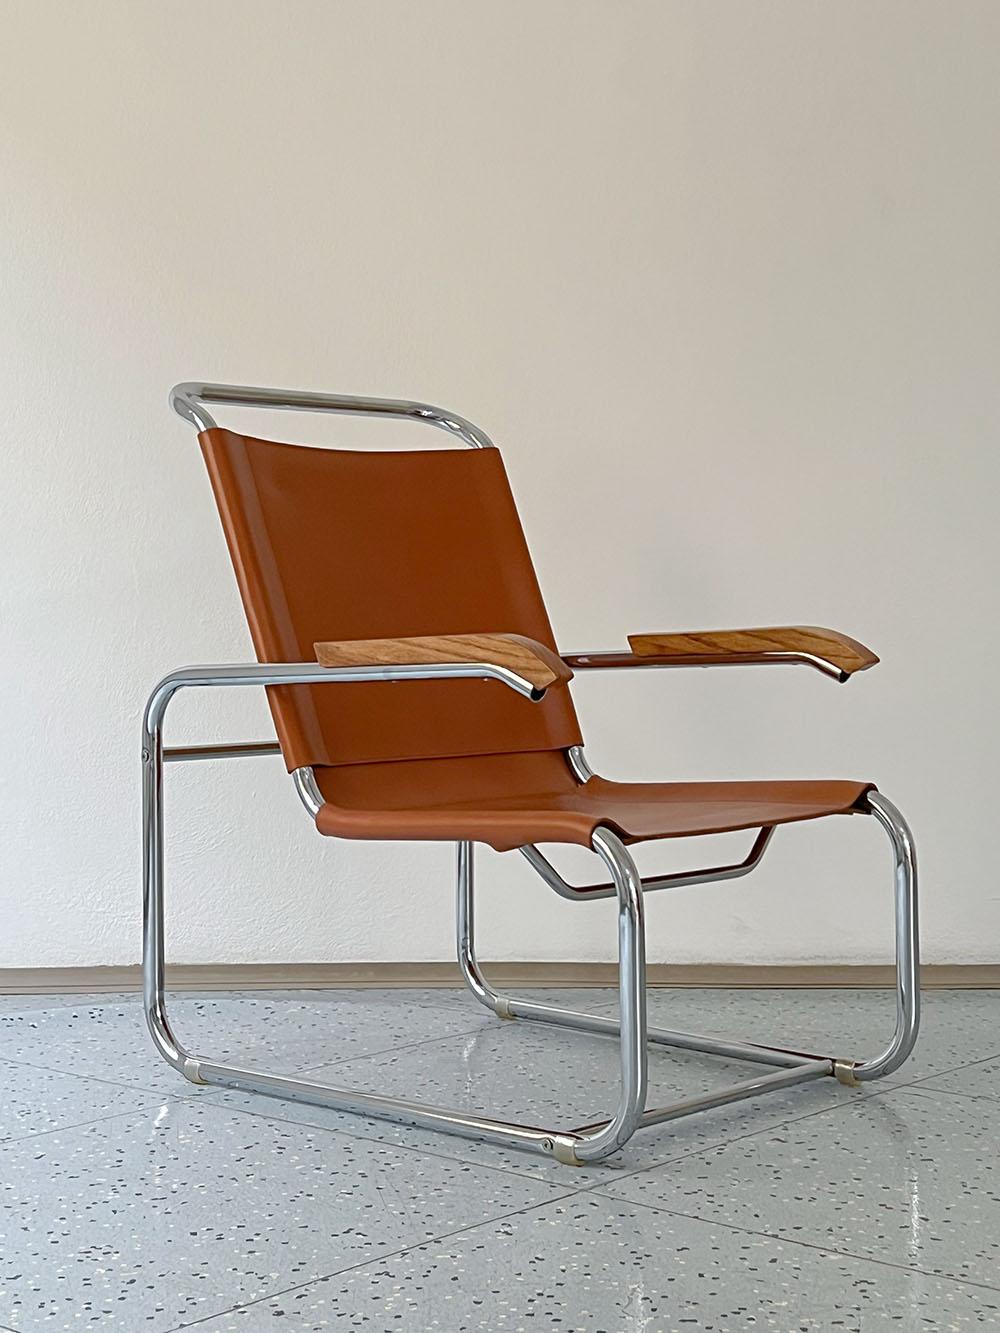 Bauhaus cantilever lounge chair model B35 designed by Marcel Breuer for Thonet in Germany, 1970s.

The lounge chair belongs to one of Marcel Breuer’s most renowned models, featuring a timeless chrome-plated tubular steel frame with oak armrests